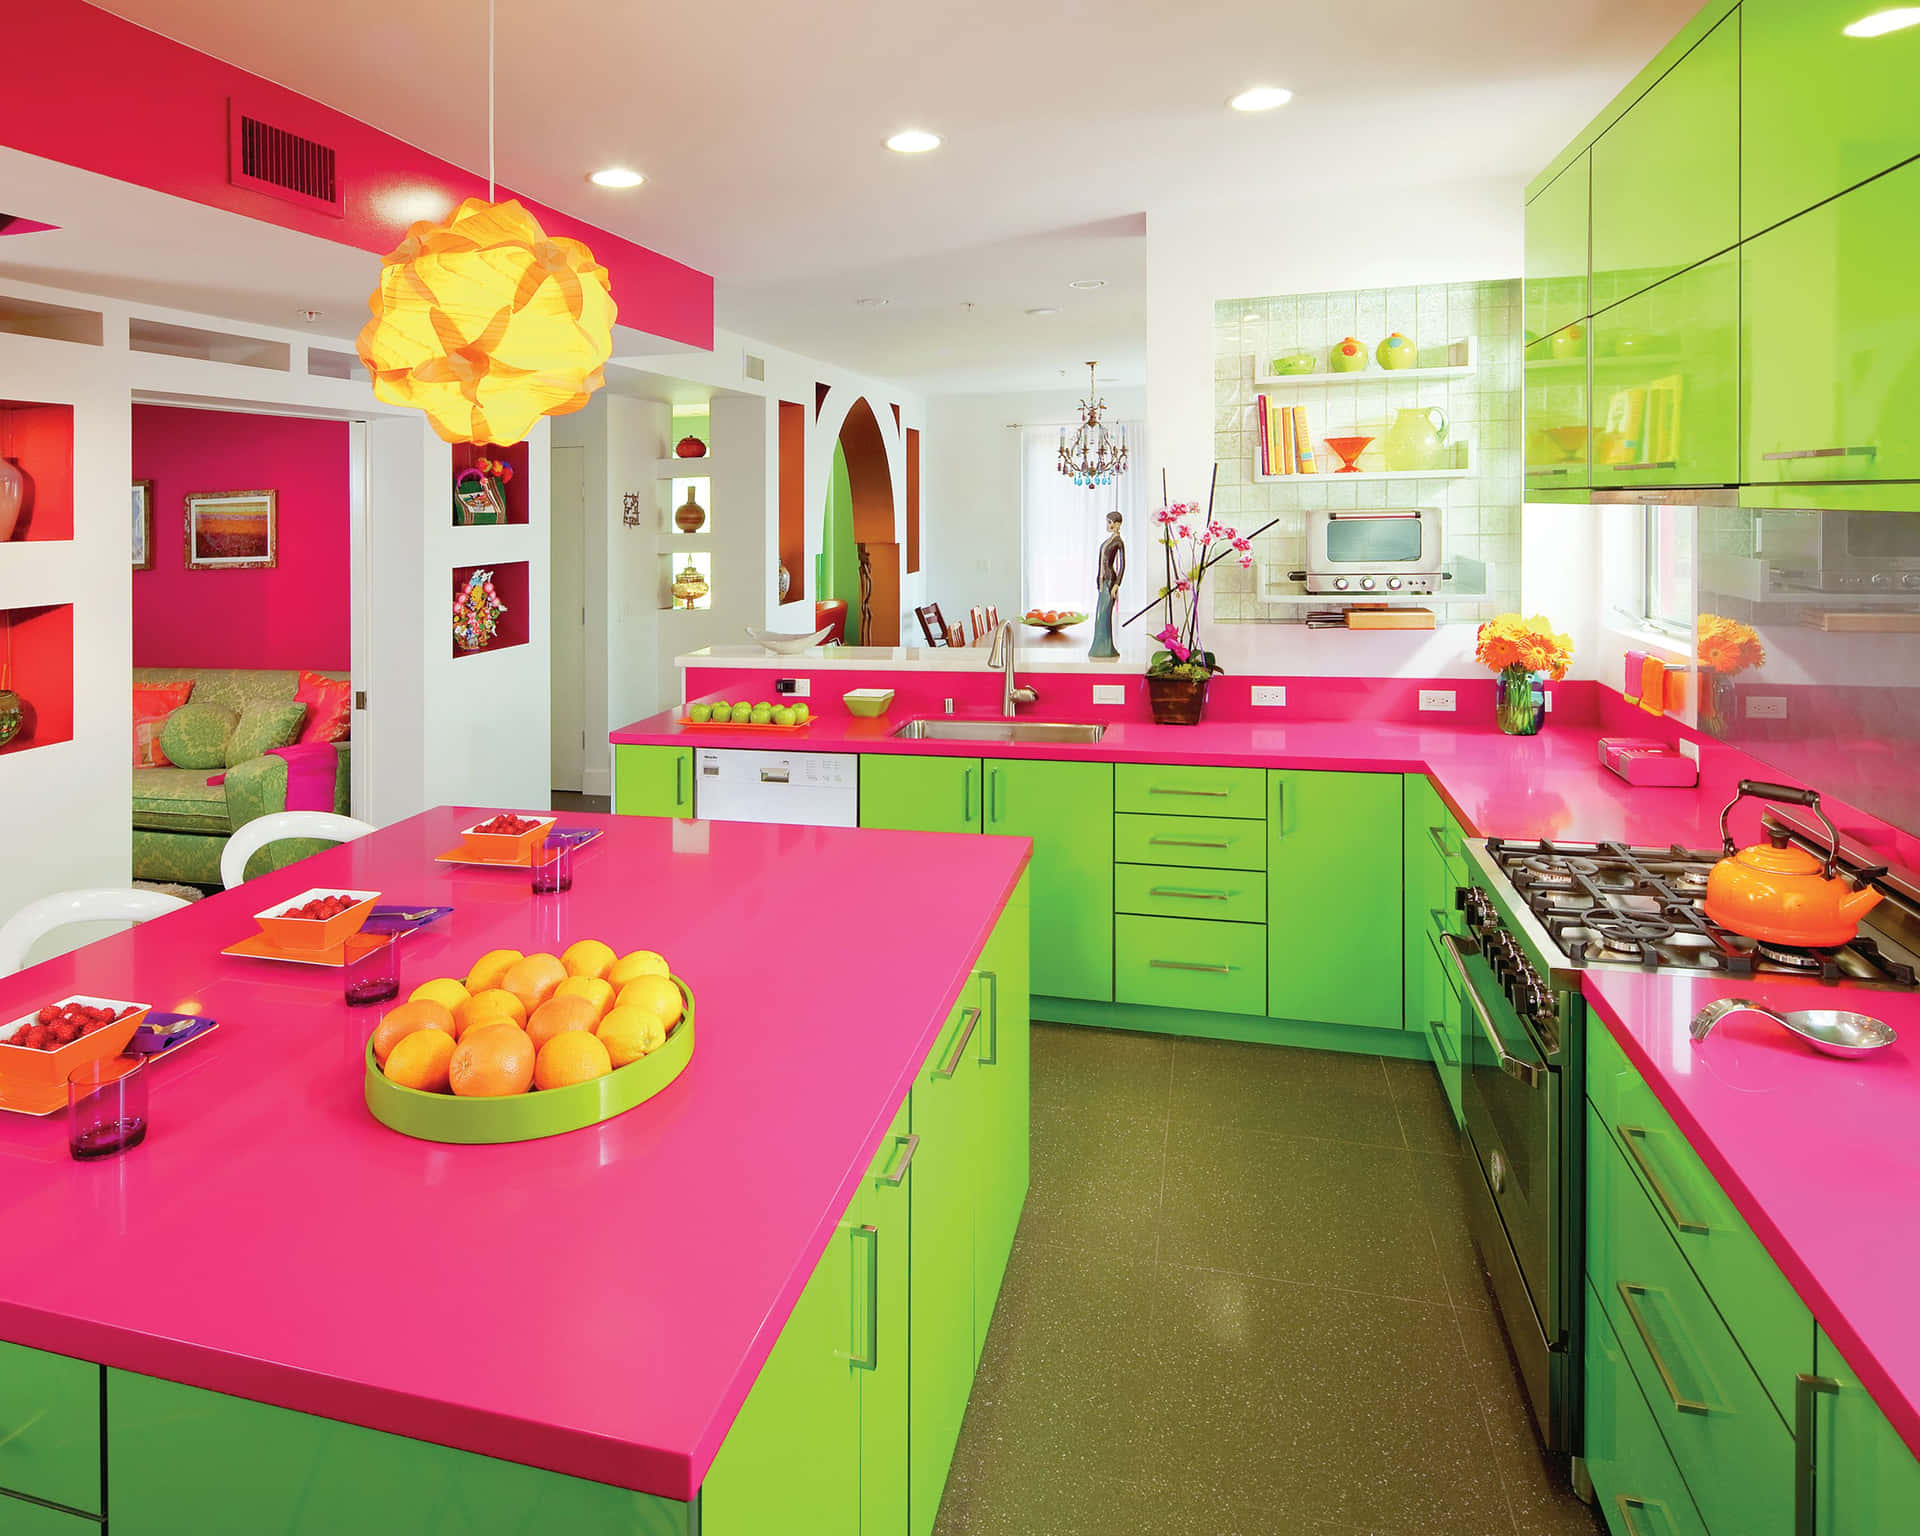 A Kitchen With Bright Pink And Green Cabinets